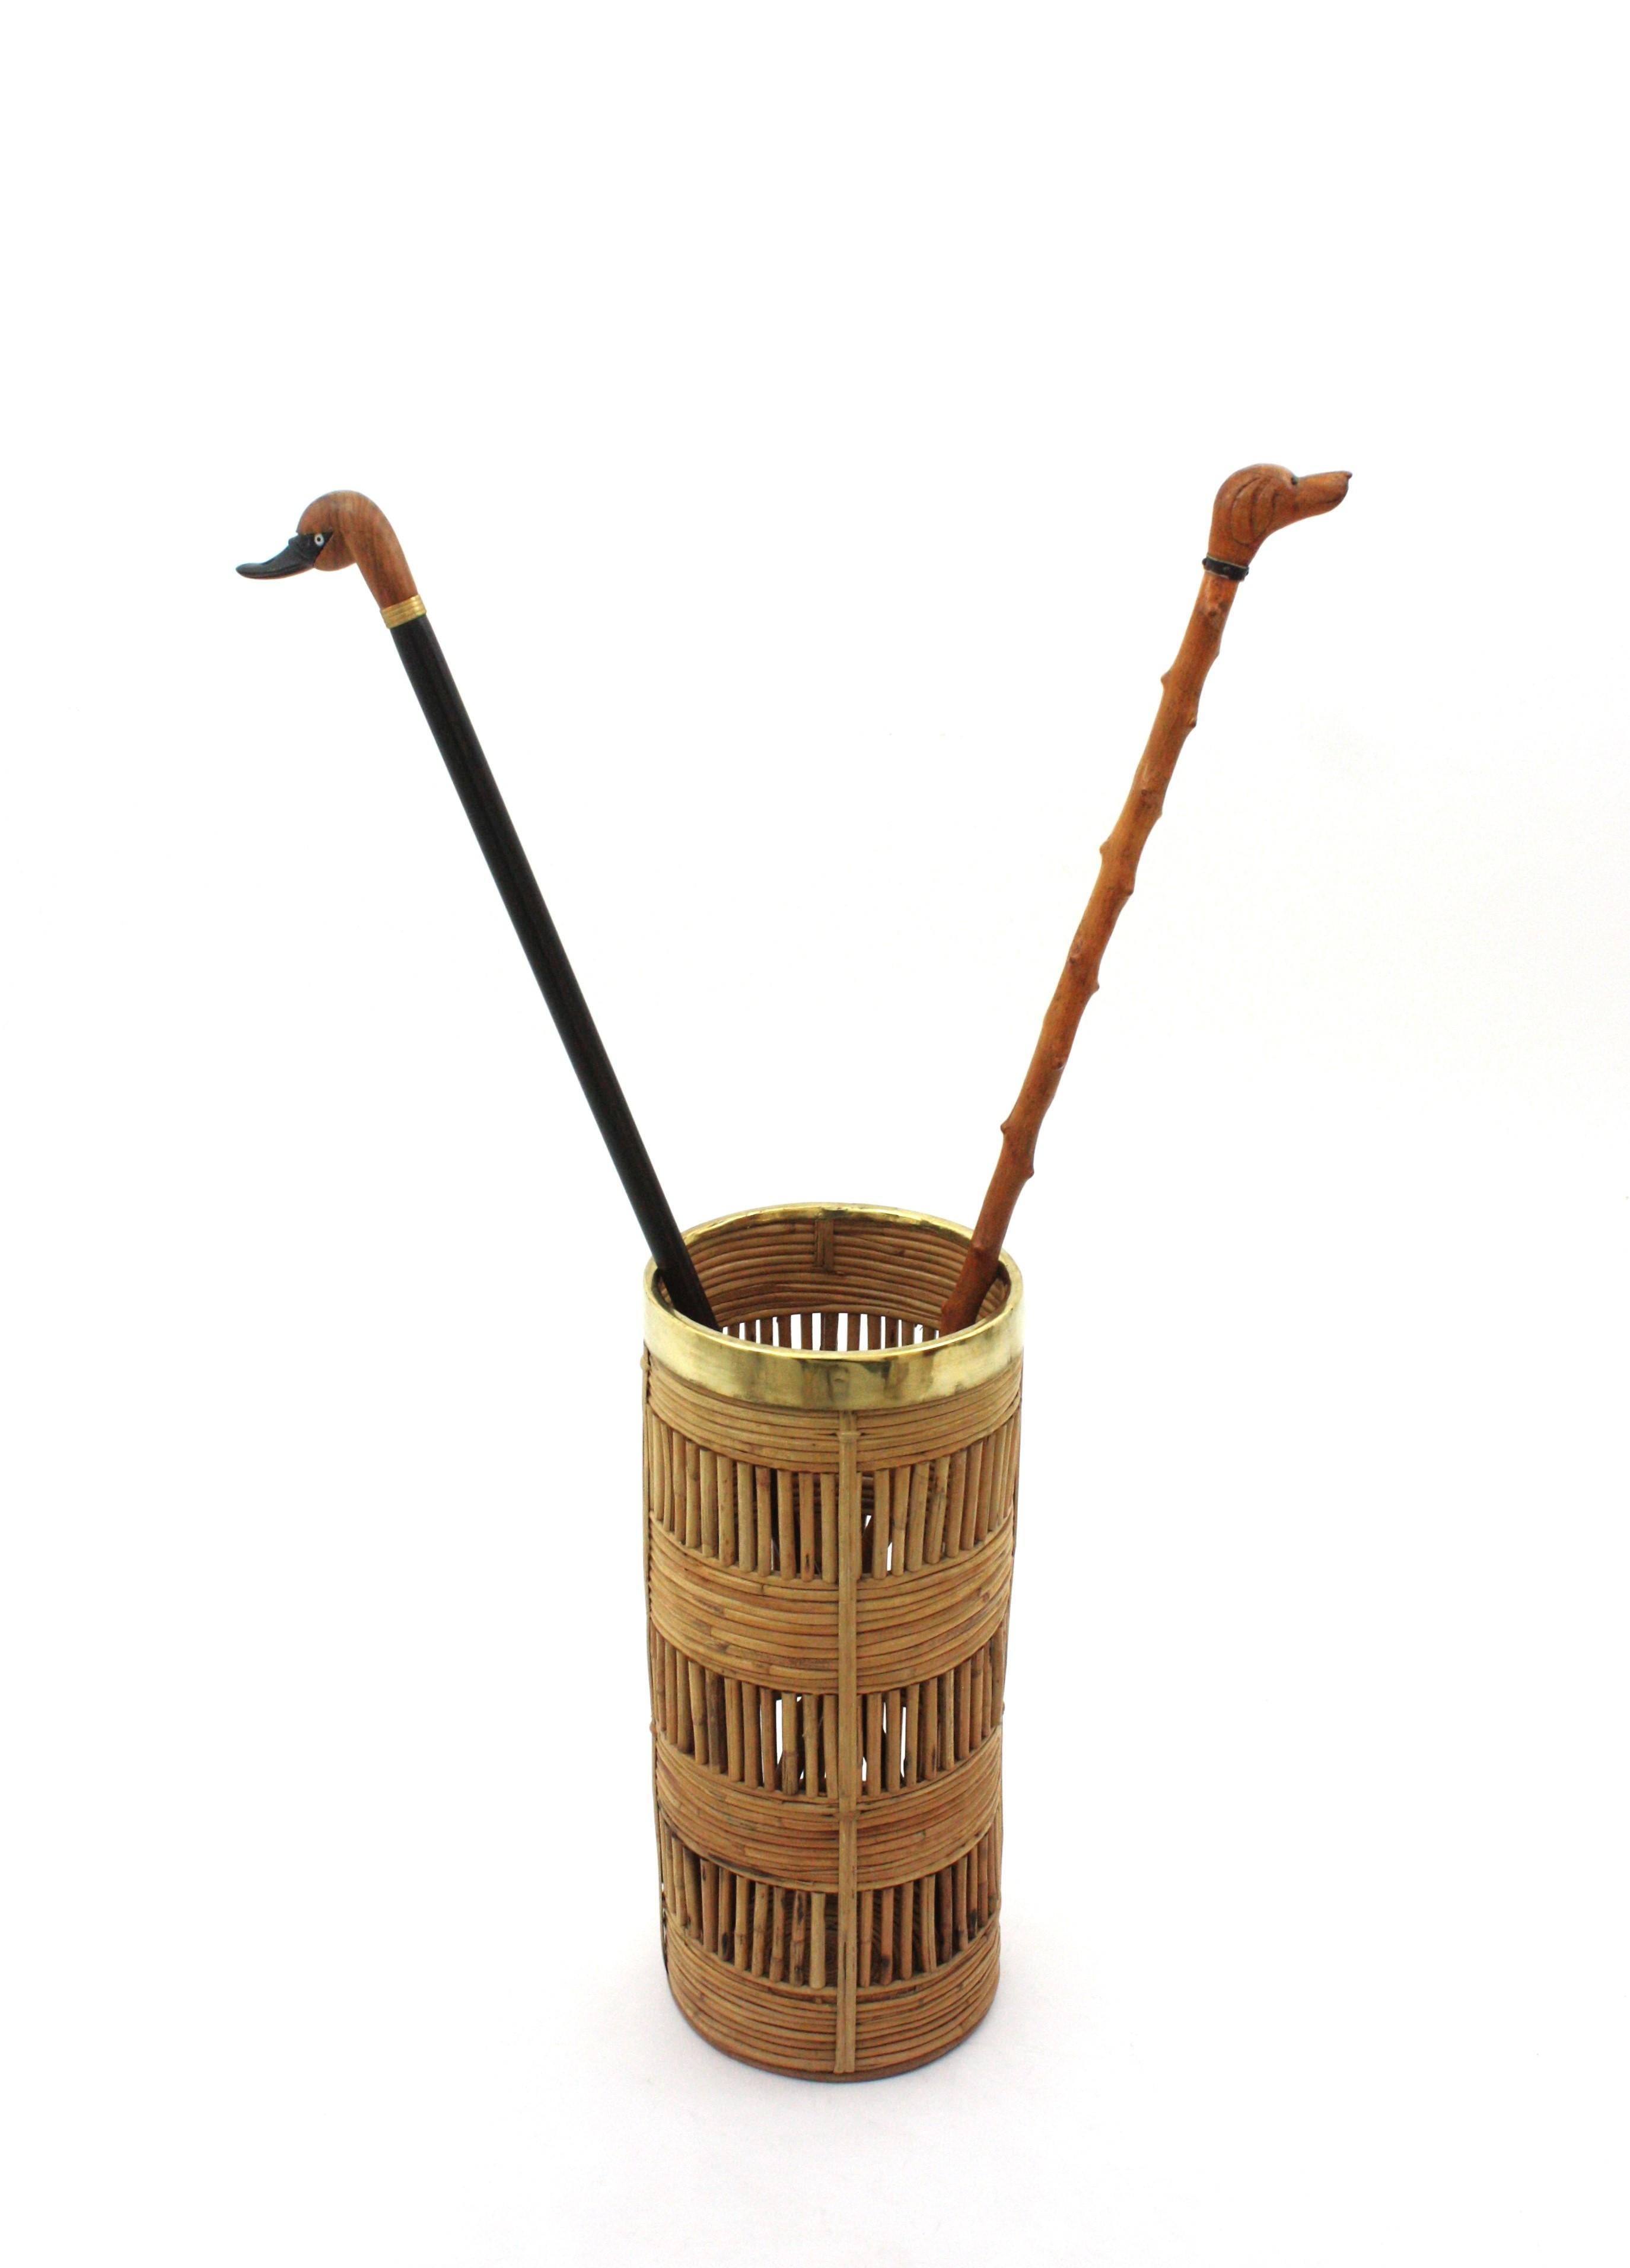 Beautiful Mid-Century Modern decorative brass and bamboo / rattan umbrella stand, tall planter or paper bin. Handcrafted in Italy, 1970s.
Round shape hand woven rattan structure with brass rim. It has reminiscences of Gabriella Crespi designs.
This